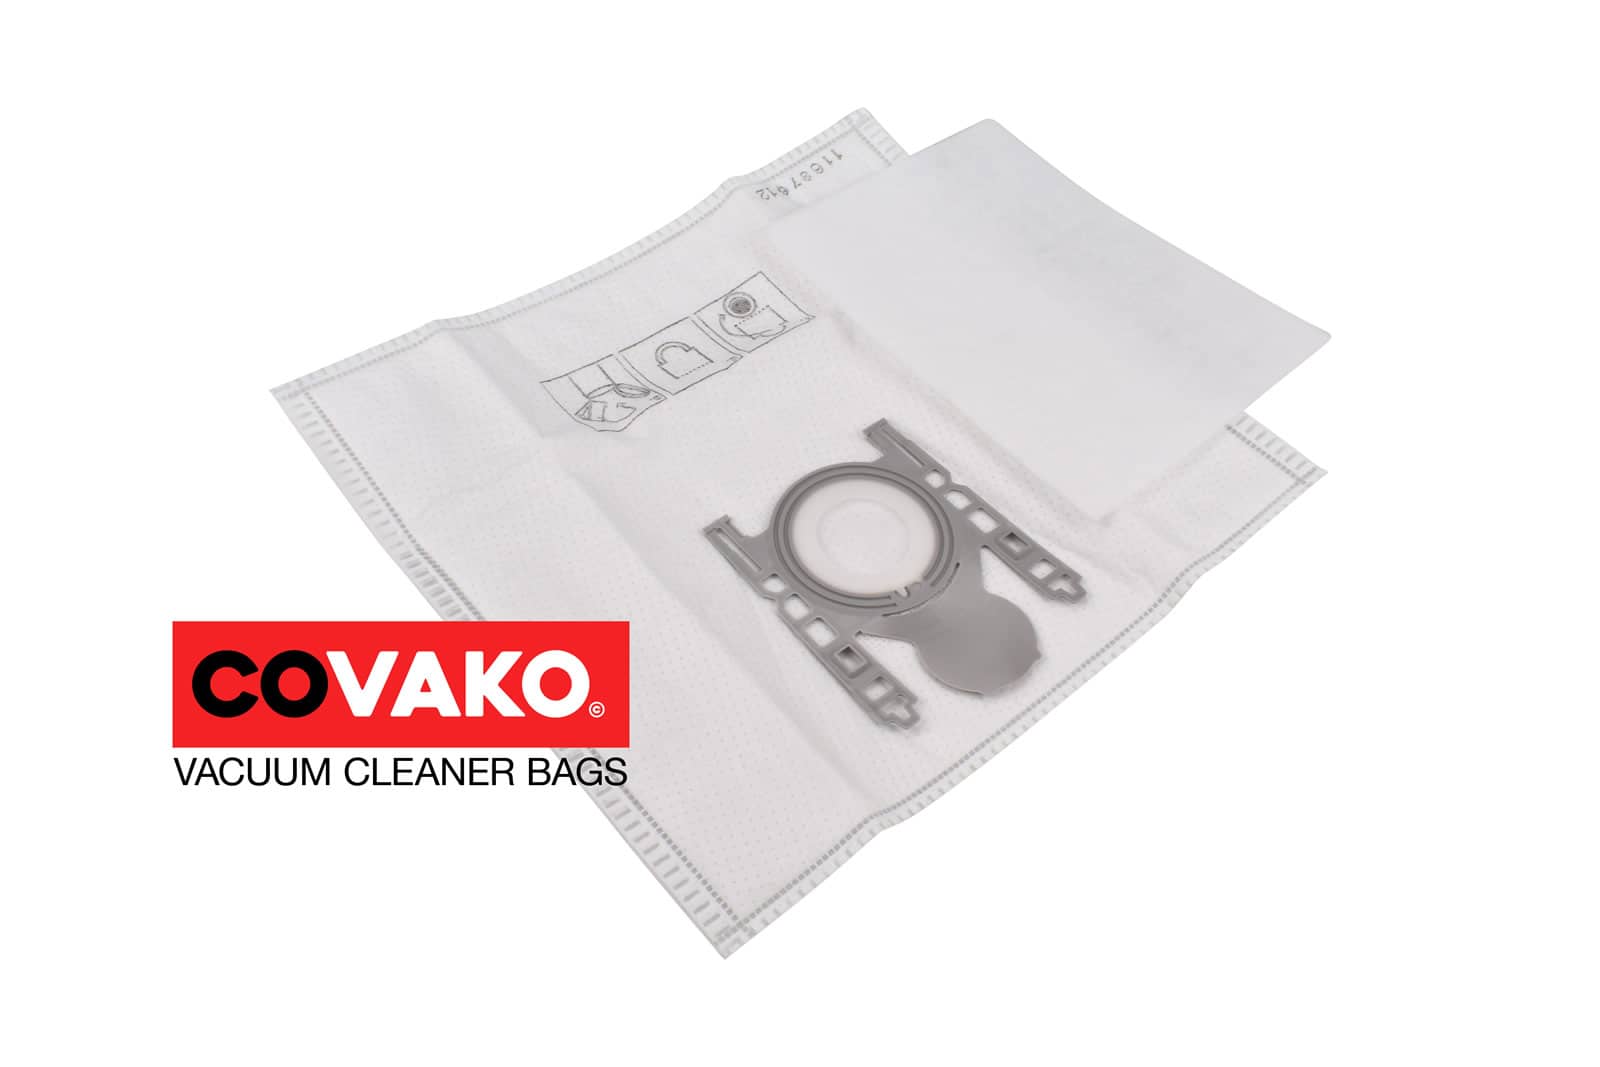 Bosch BBS 2400-2999 / Synthesis - Bosch vacuum cleaner bags